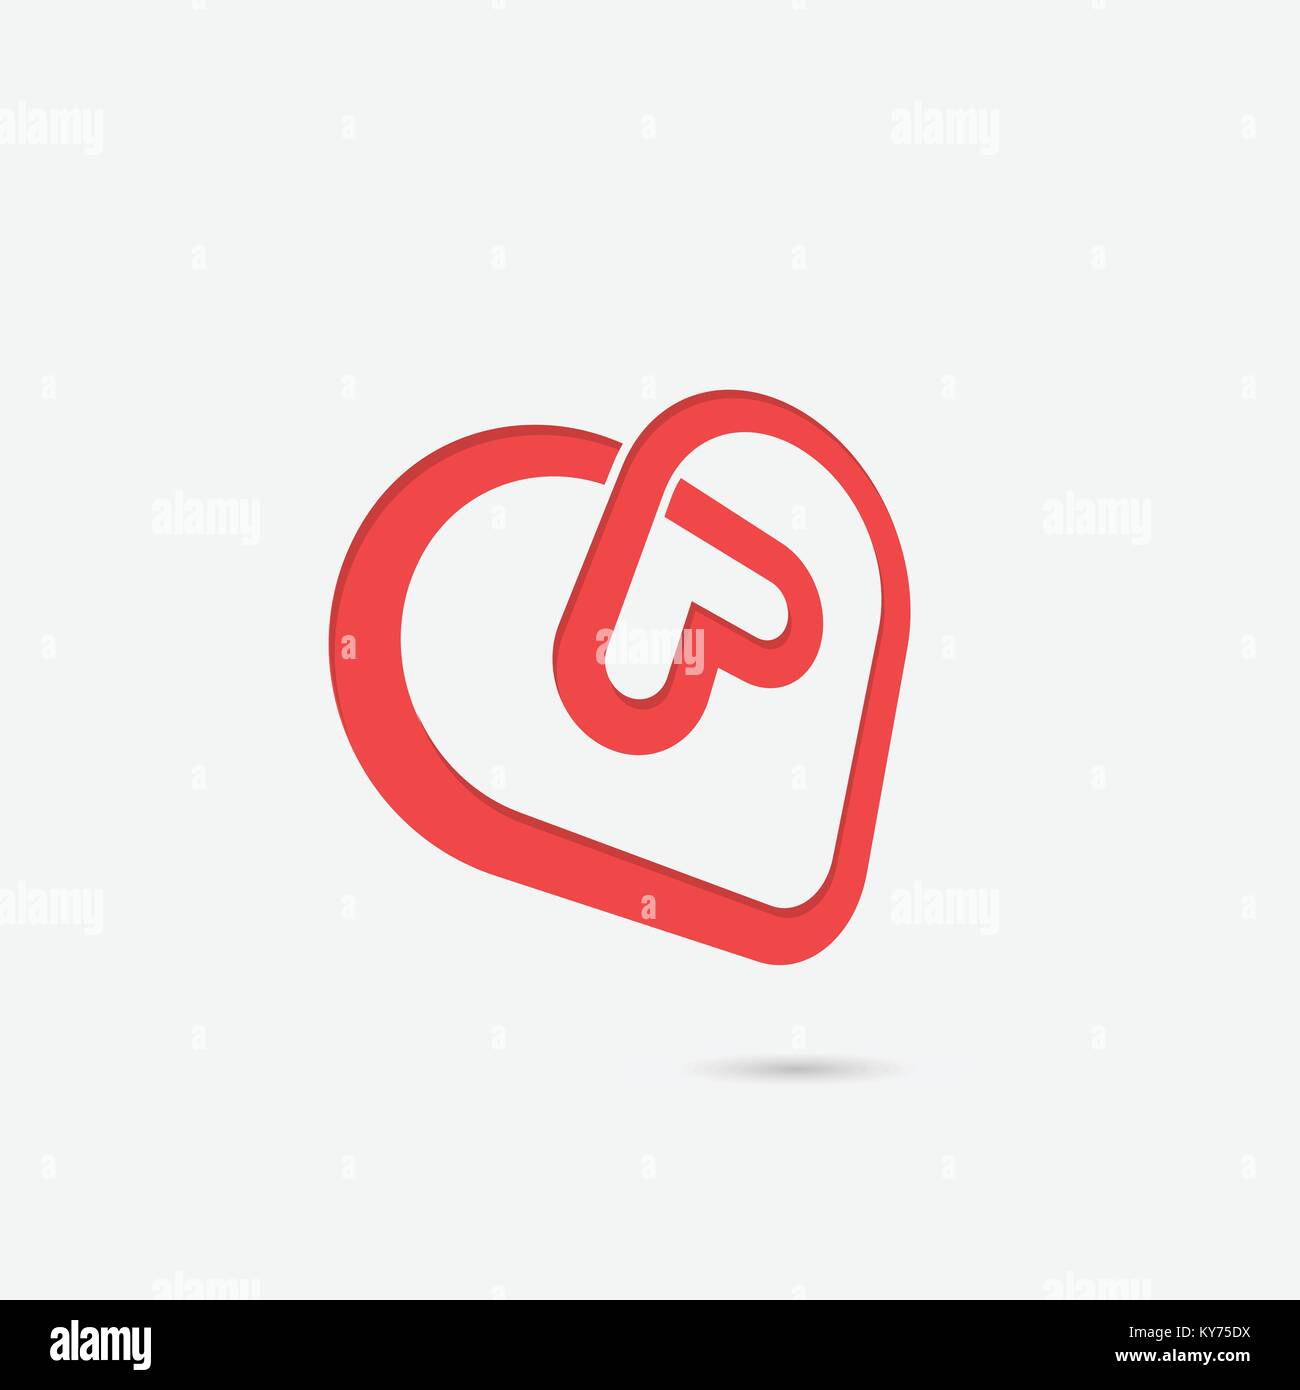 Heart icons vector logo design template.Love symbol.Valentine's Day sign.Emblem isolated on white background.Vector illustration Stock Vector